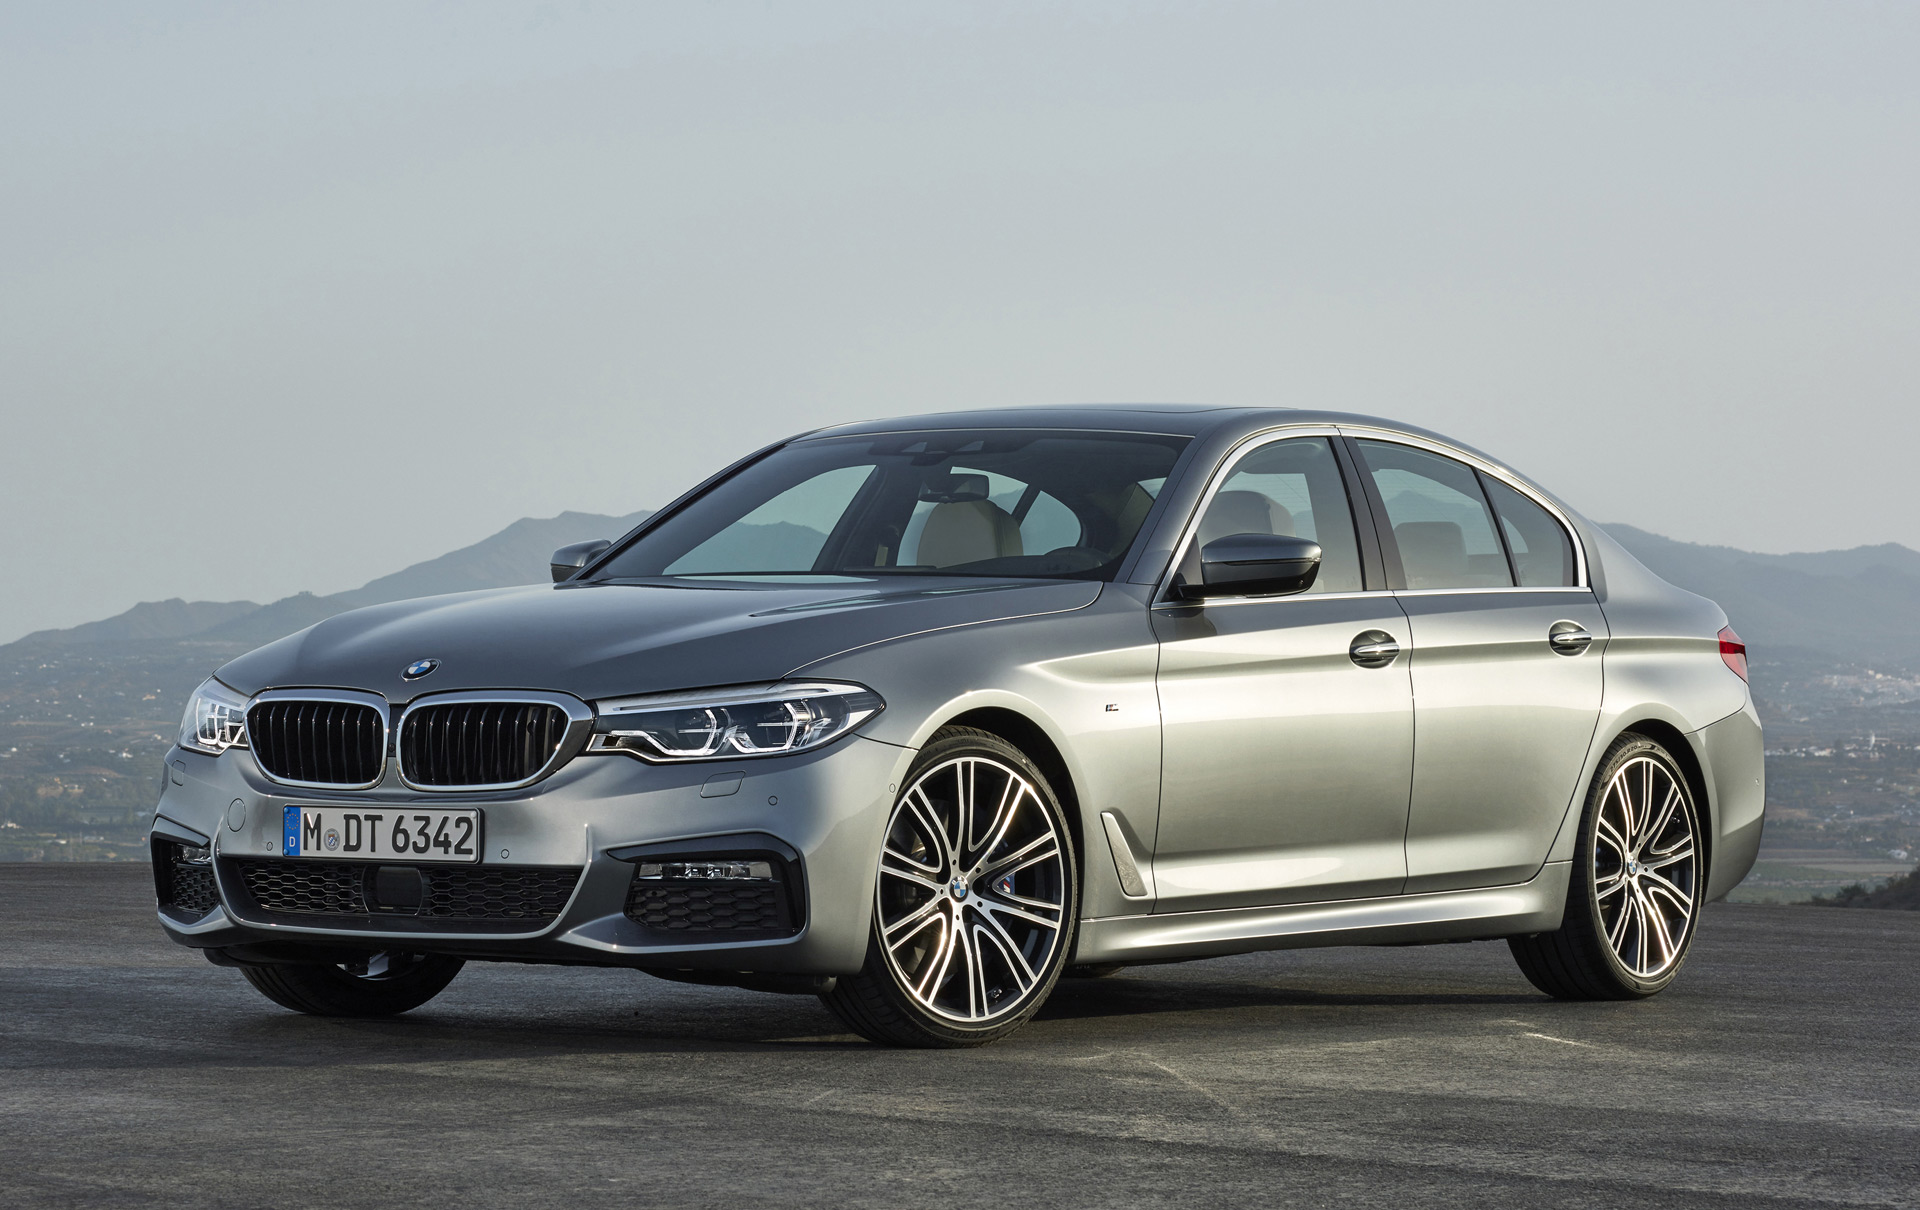 2017 BMW 5-Series first drive review: playing the middle